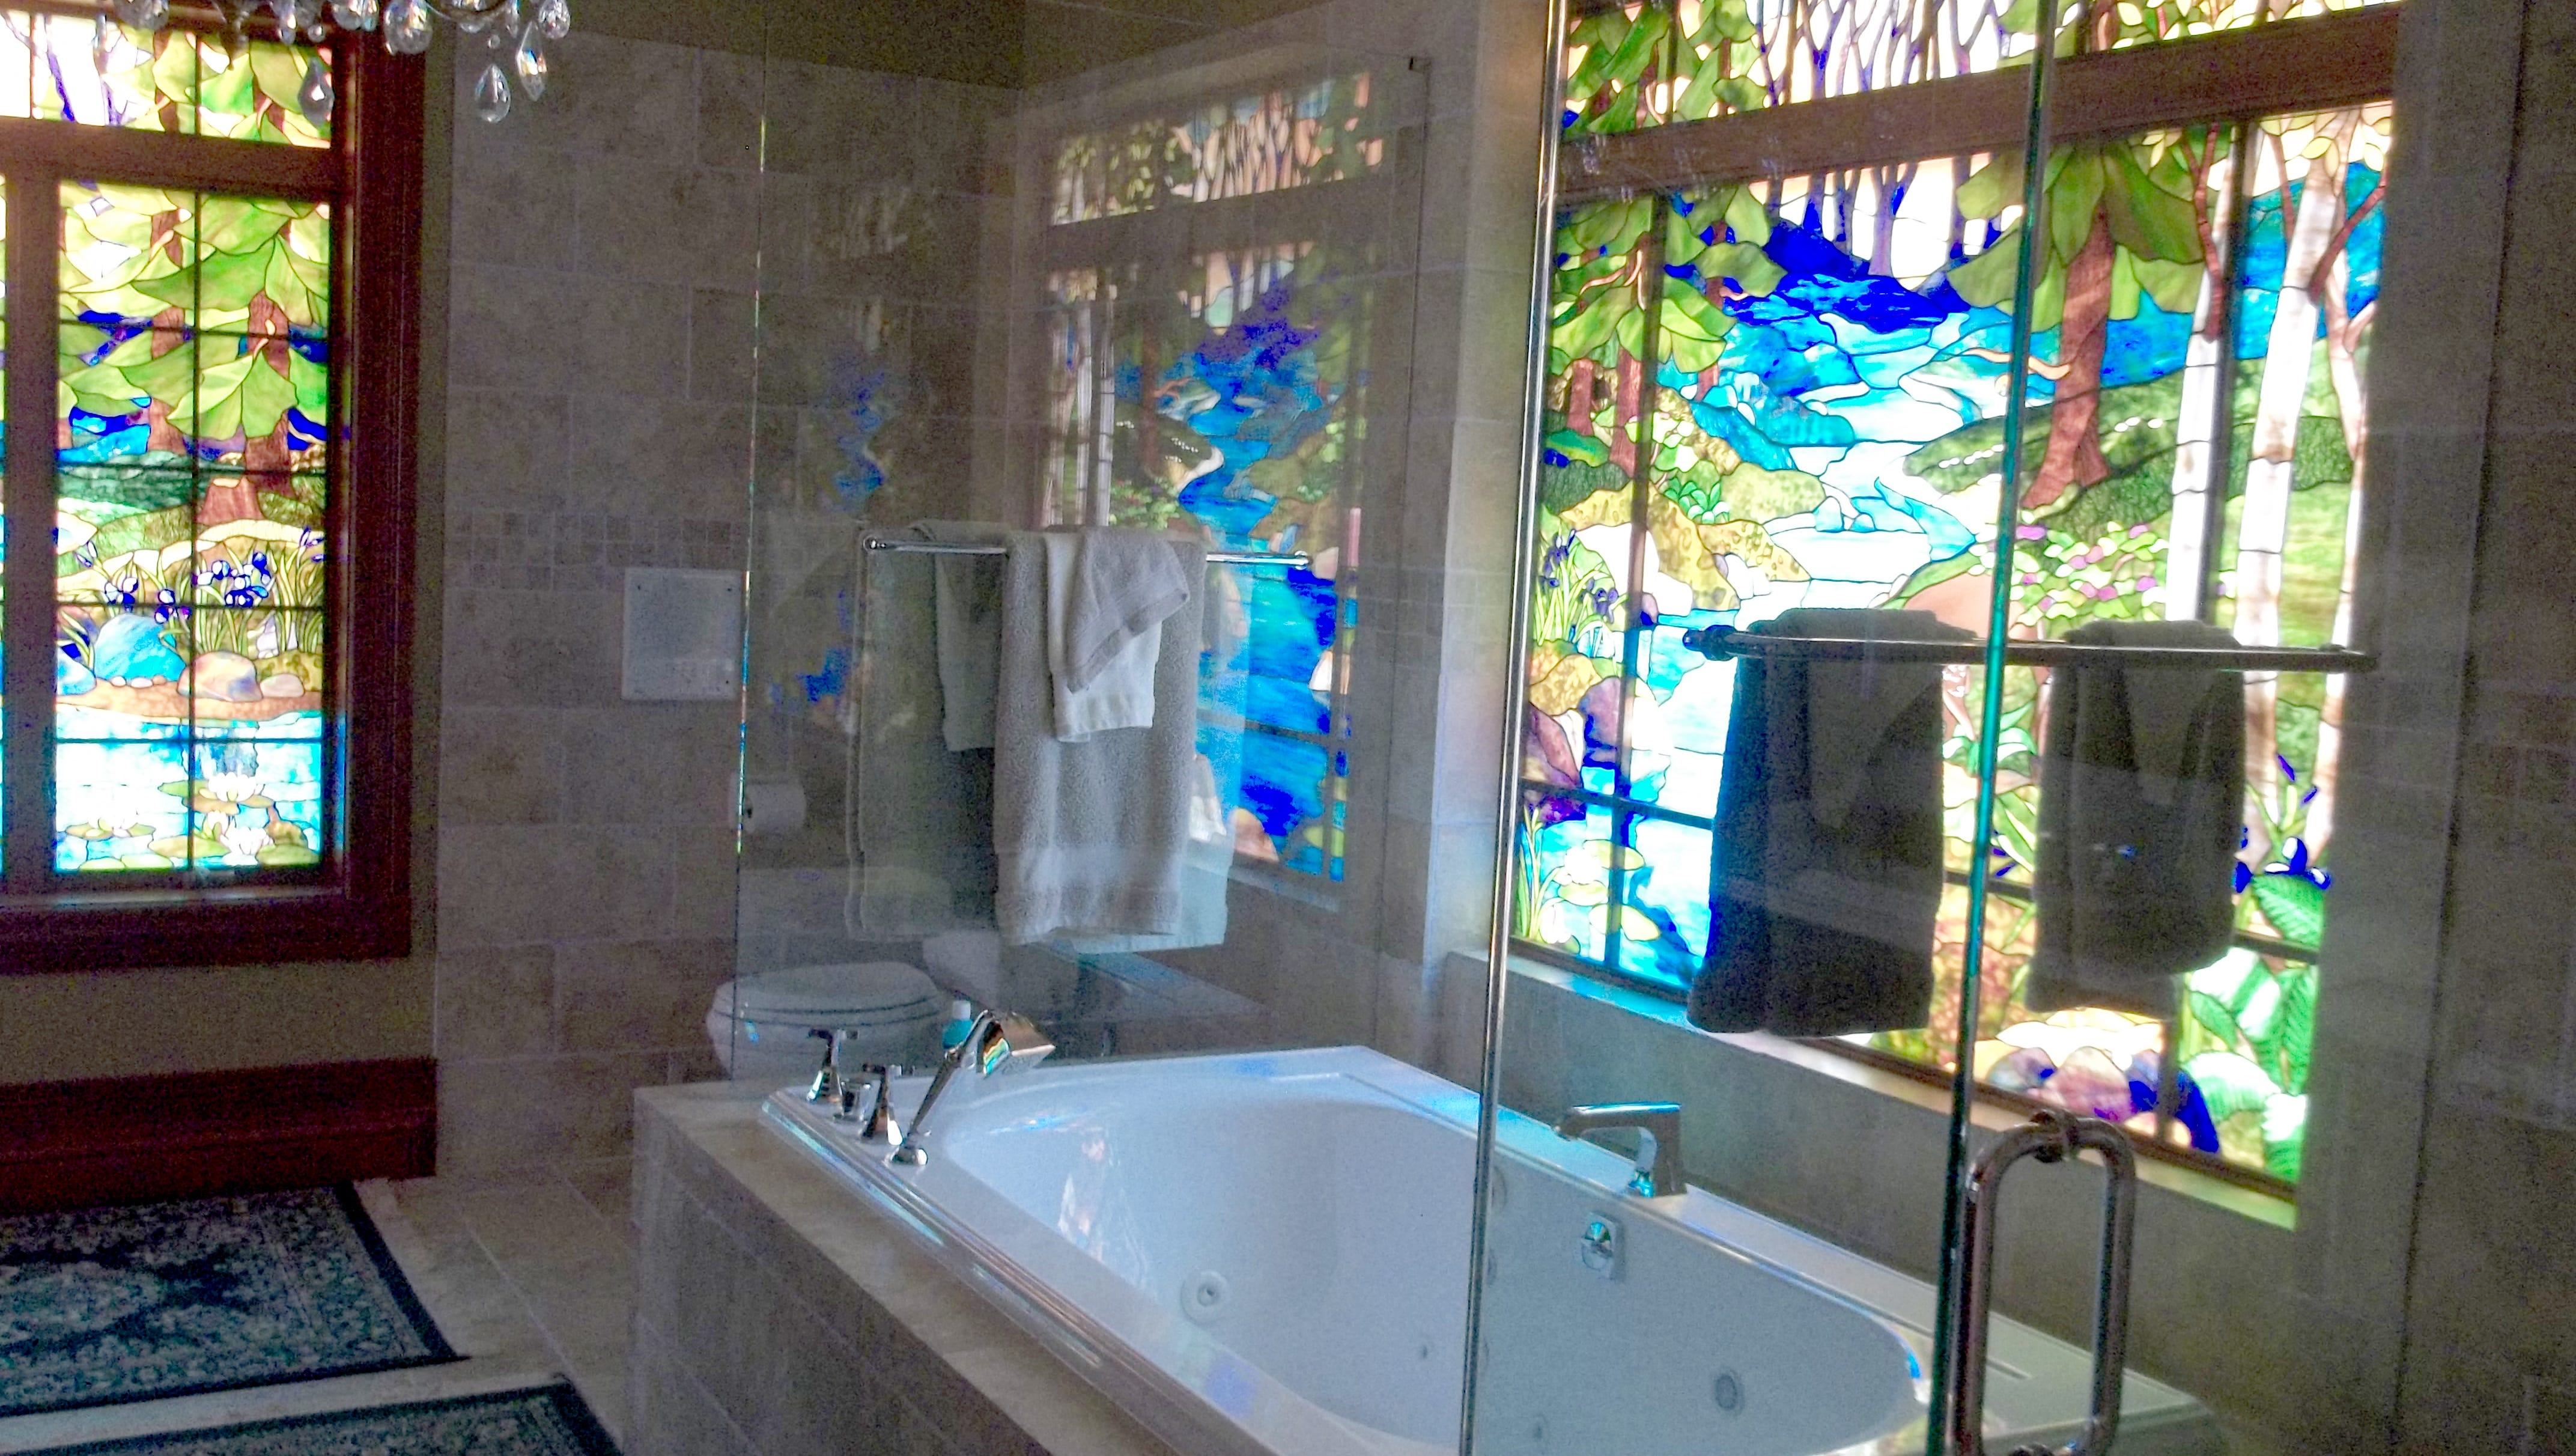 One of the bathrooms features stained glass windows.